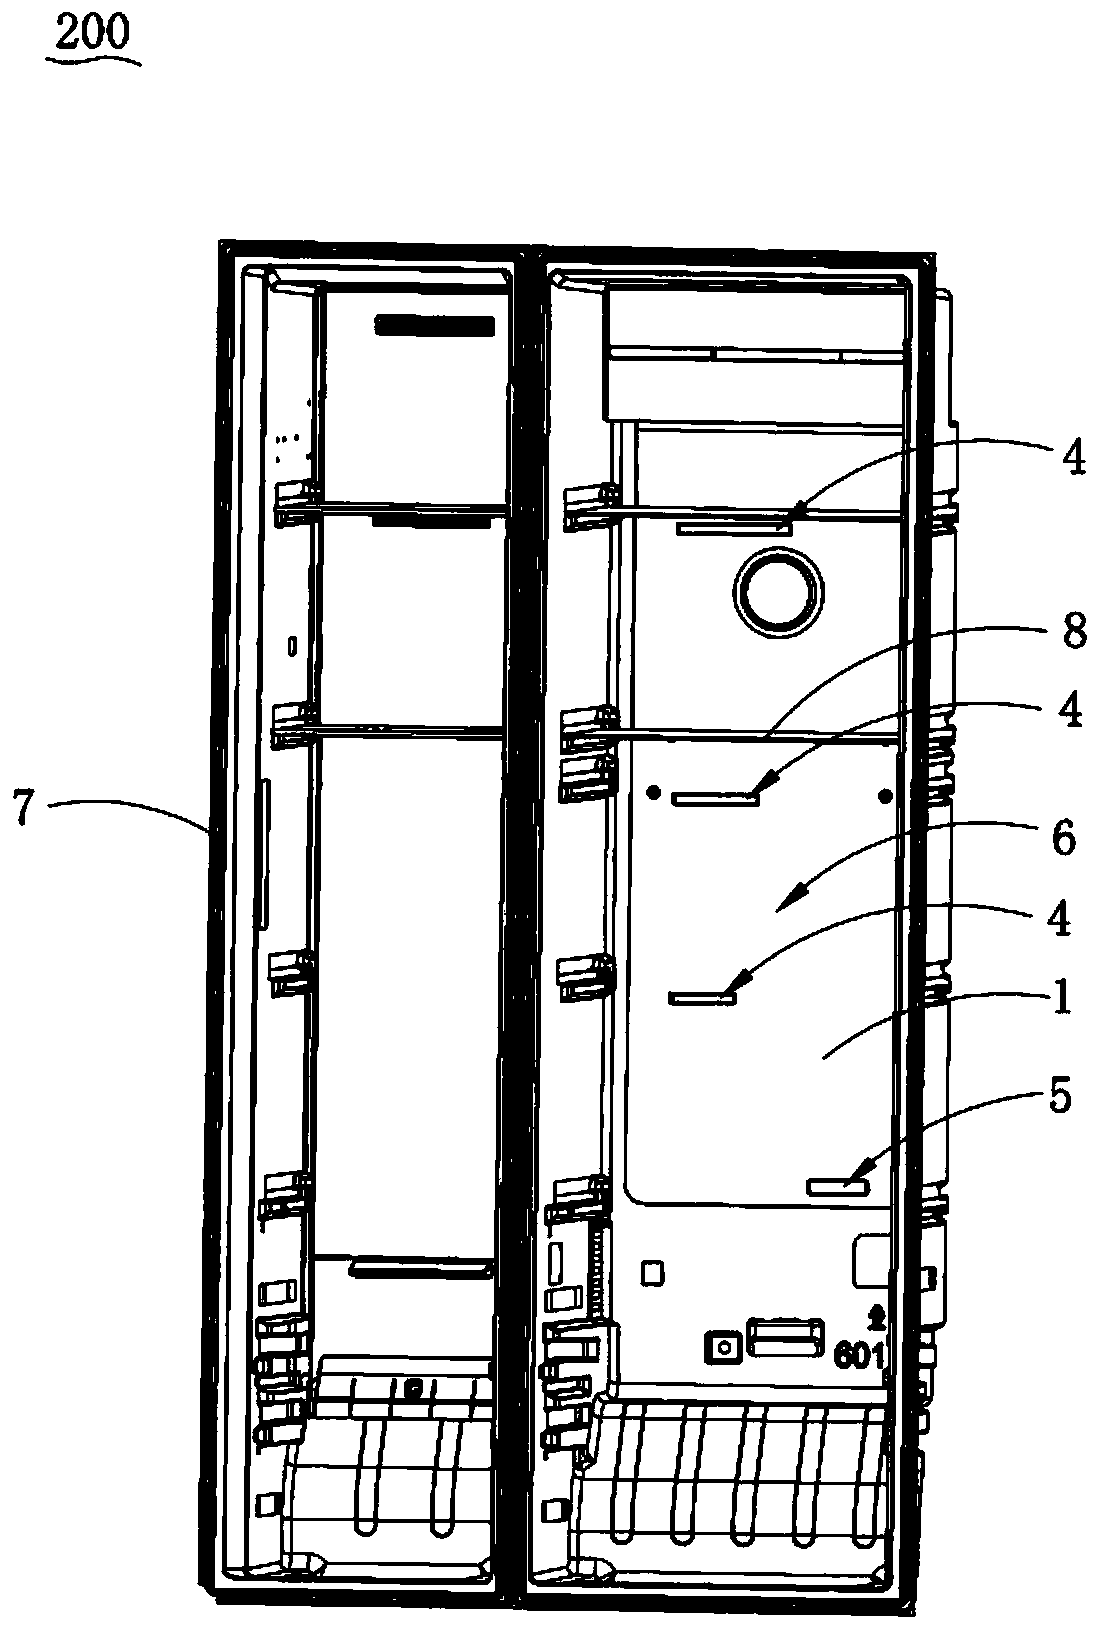 Air duct assembly and refrigeration equipment